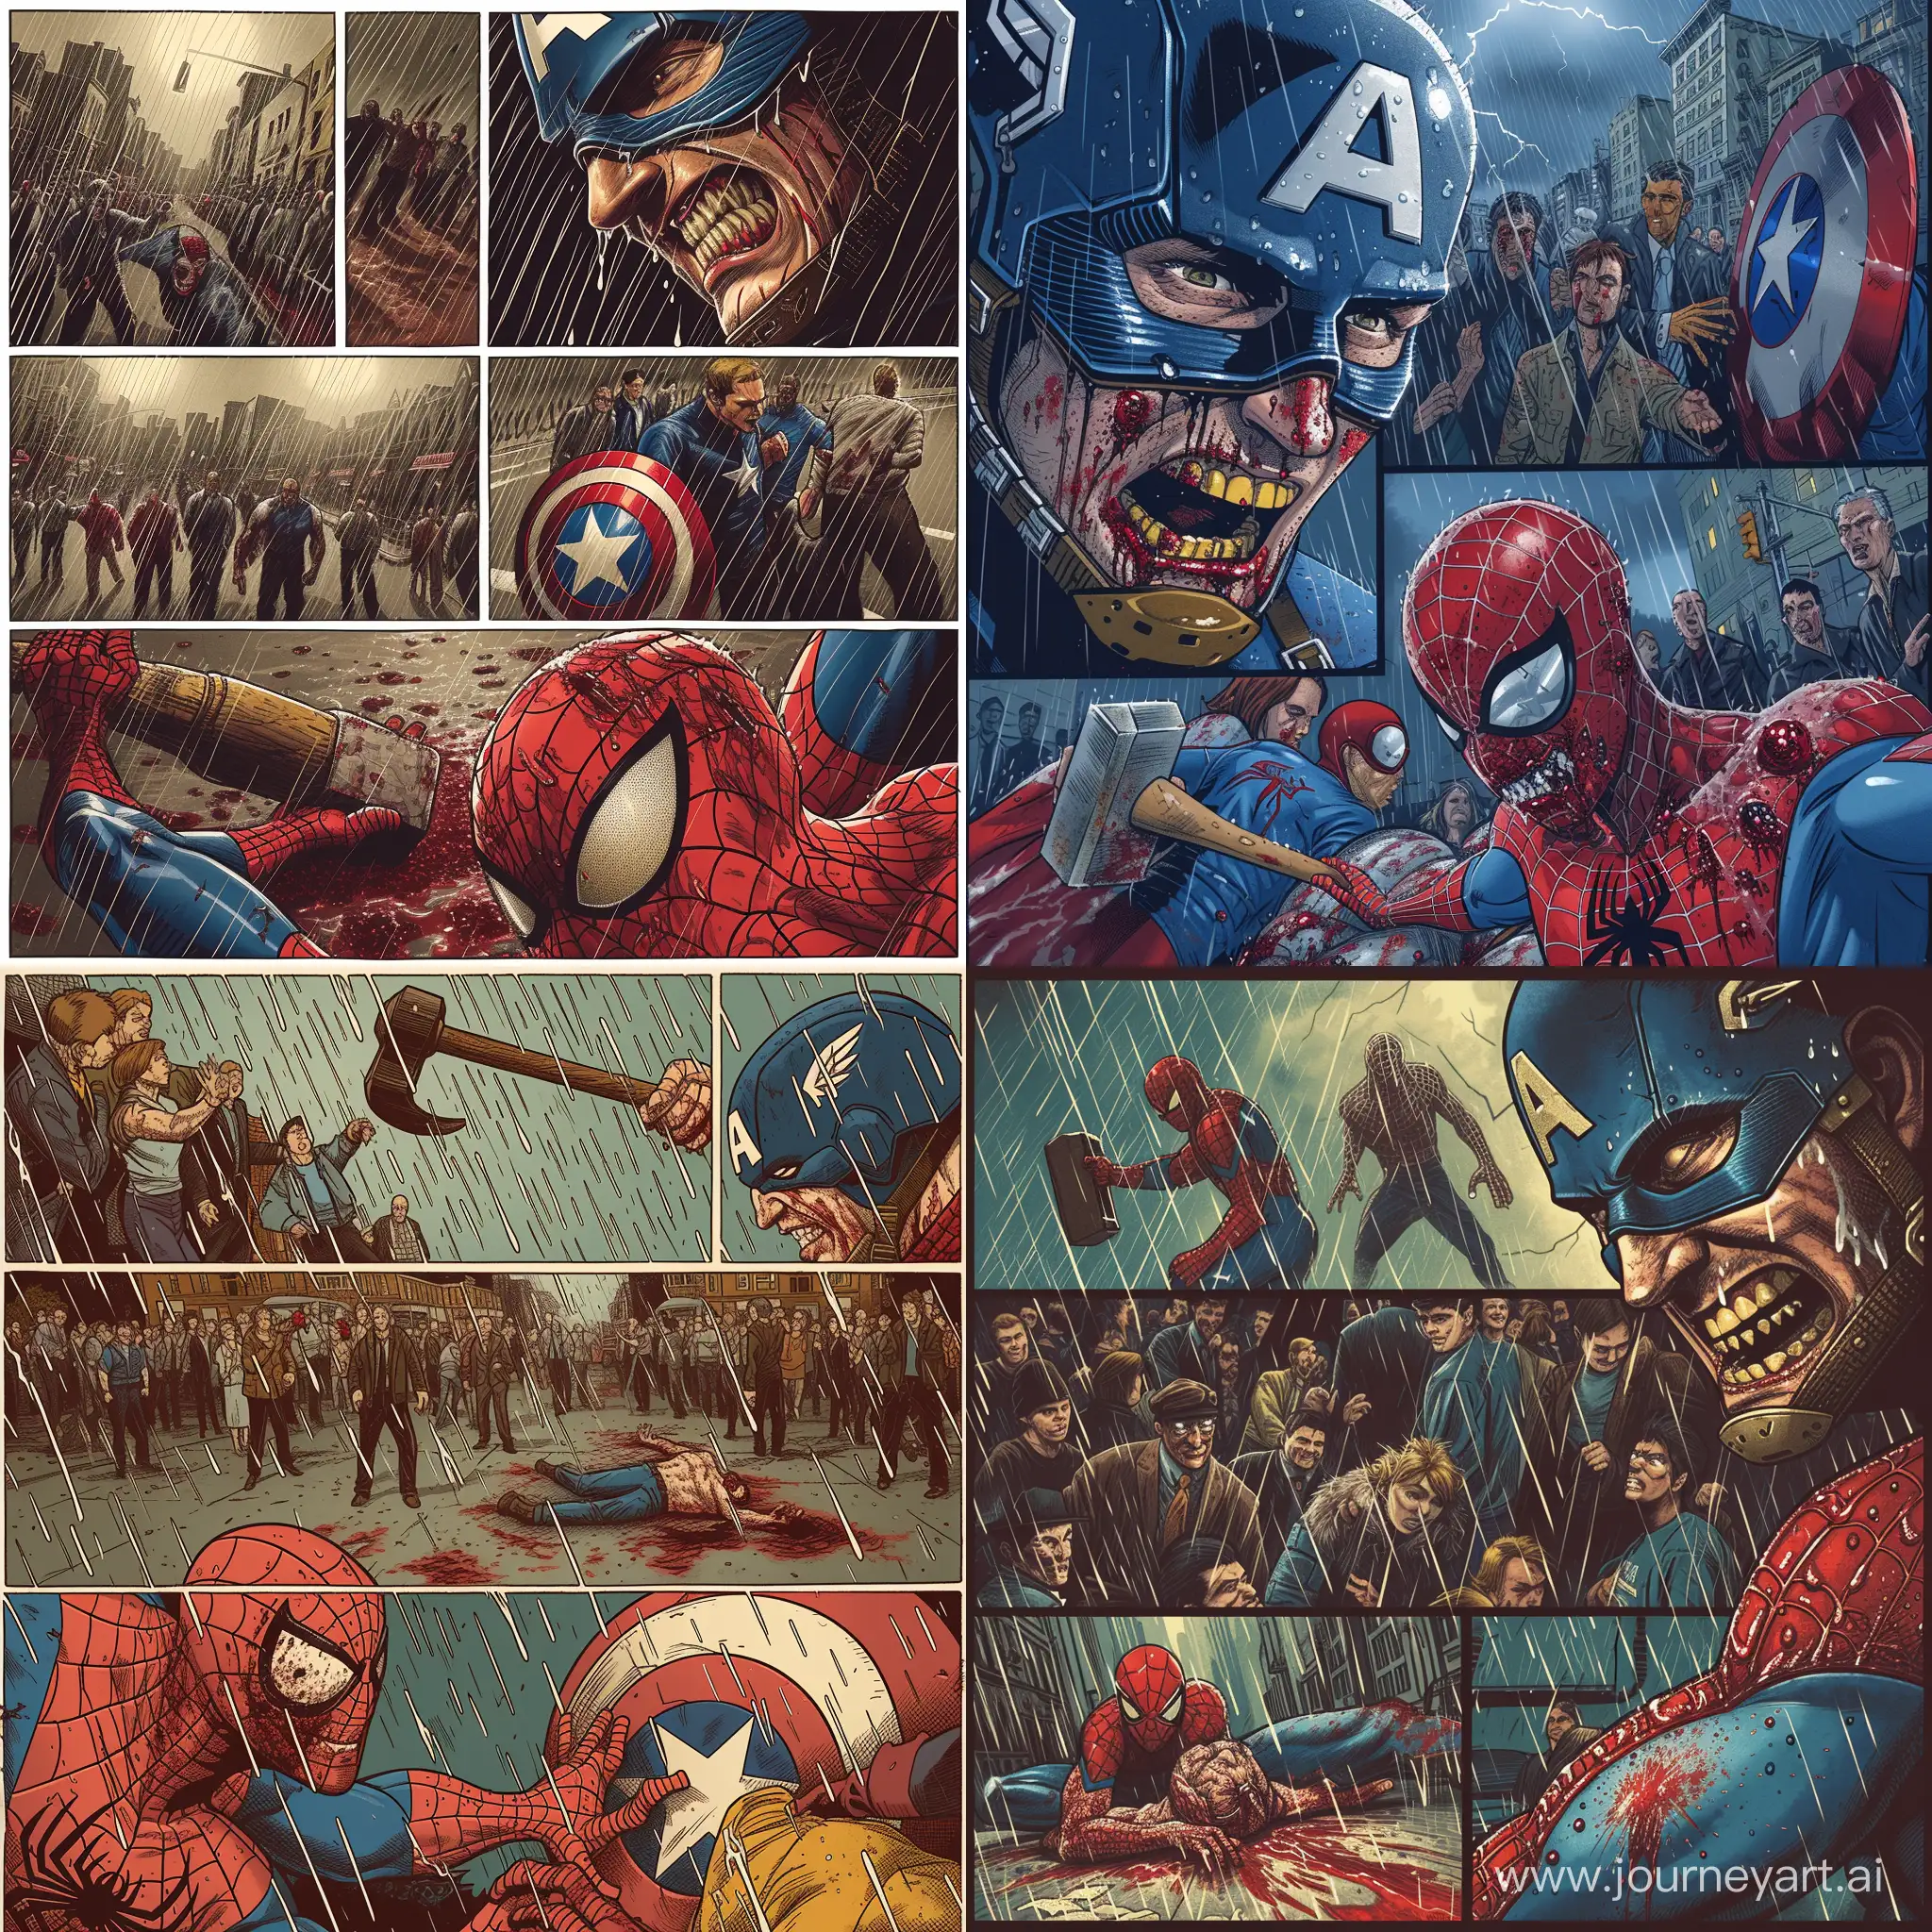 Act as an artist creating a comic strip depicting an intense showdown between an evil Captain America and a severely injured Spider-Man. Spider-Man lies on the ground, covered in blood, barely breathing. The wicked grin on Captain America's face reveals his malevolence, while he is drenched in Spider-Man's blood. Set the scene in a neighborhood in New York City, during a dark and stormy night. Rain pours from the sky, accompanied by thunder. Ordinary people surround Spider-Man and Captain America, their faces disbelieving and shocked. Captain America prepares to deliver his final blow to Spider-Man with a hammer in his hand. Ensure that the artwork faithfully captures the distinct Marvel comic style, with flawless execution and attention to detail.